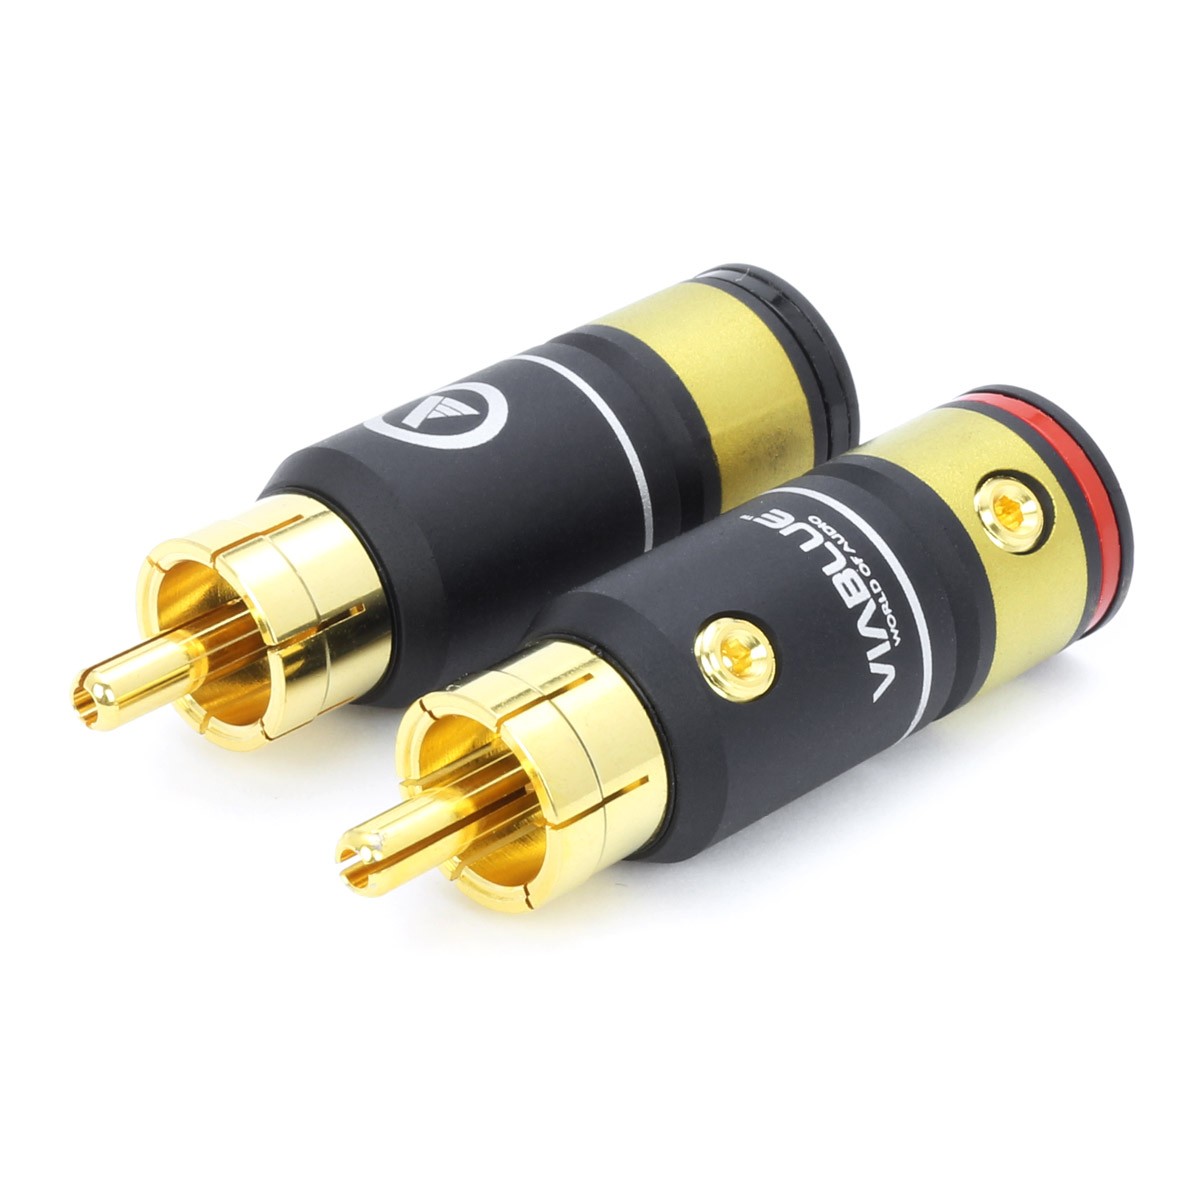 VIABLUE T6S Gold Plated RCA Connectors Ø9.5mm (Pair)